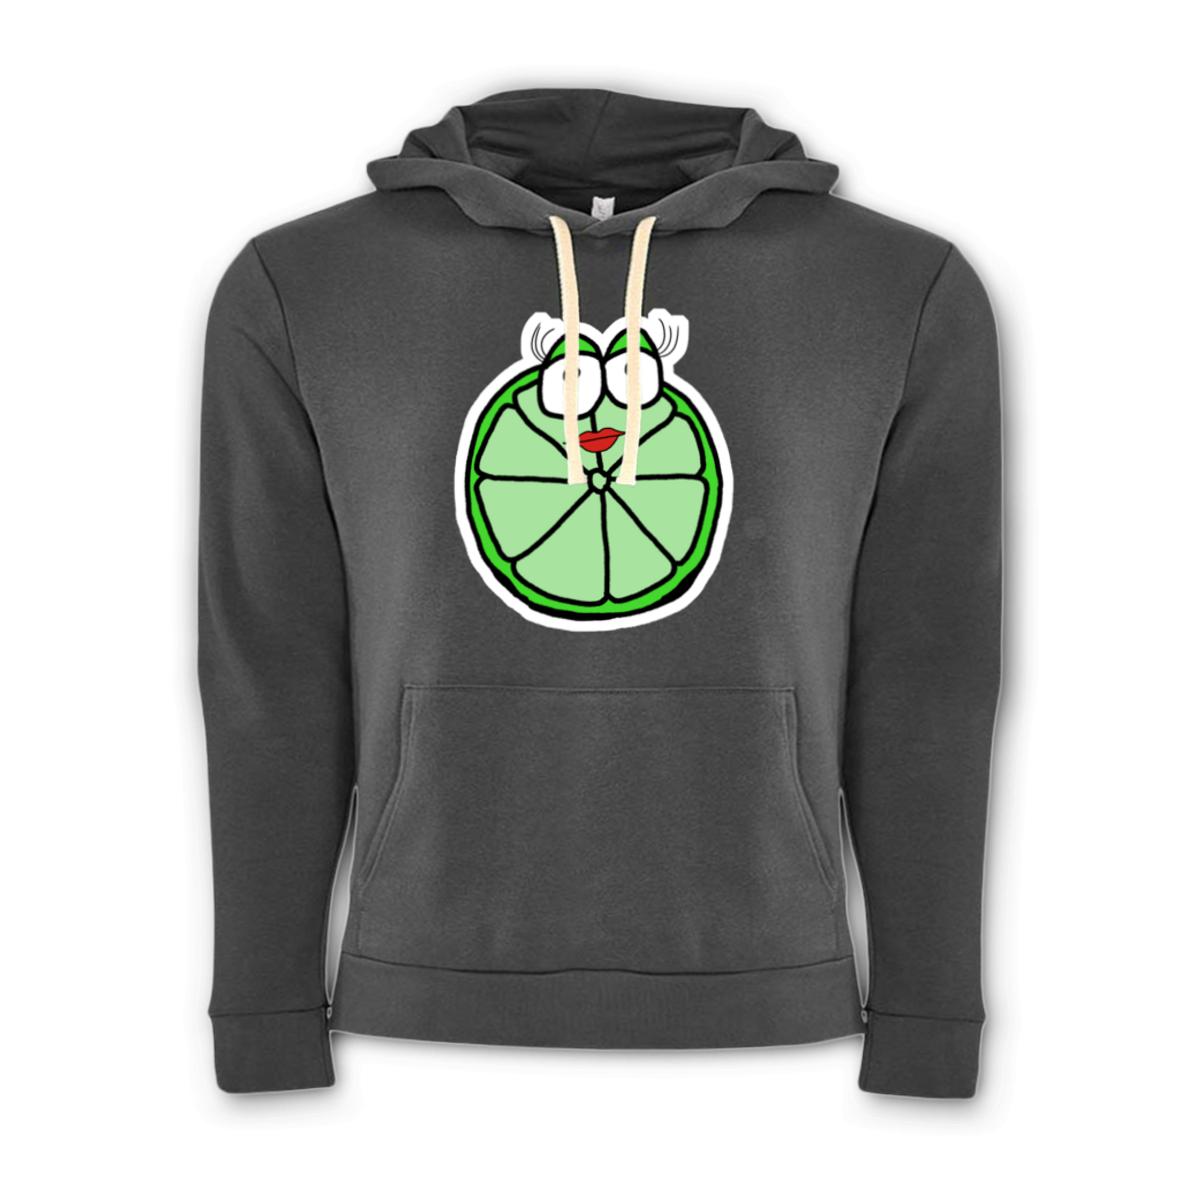 Lime Unisex Pullover Hoodie Small heavy-metal